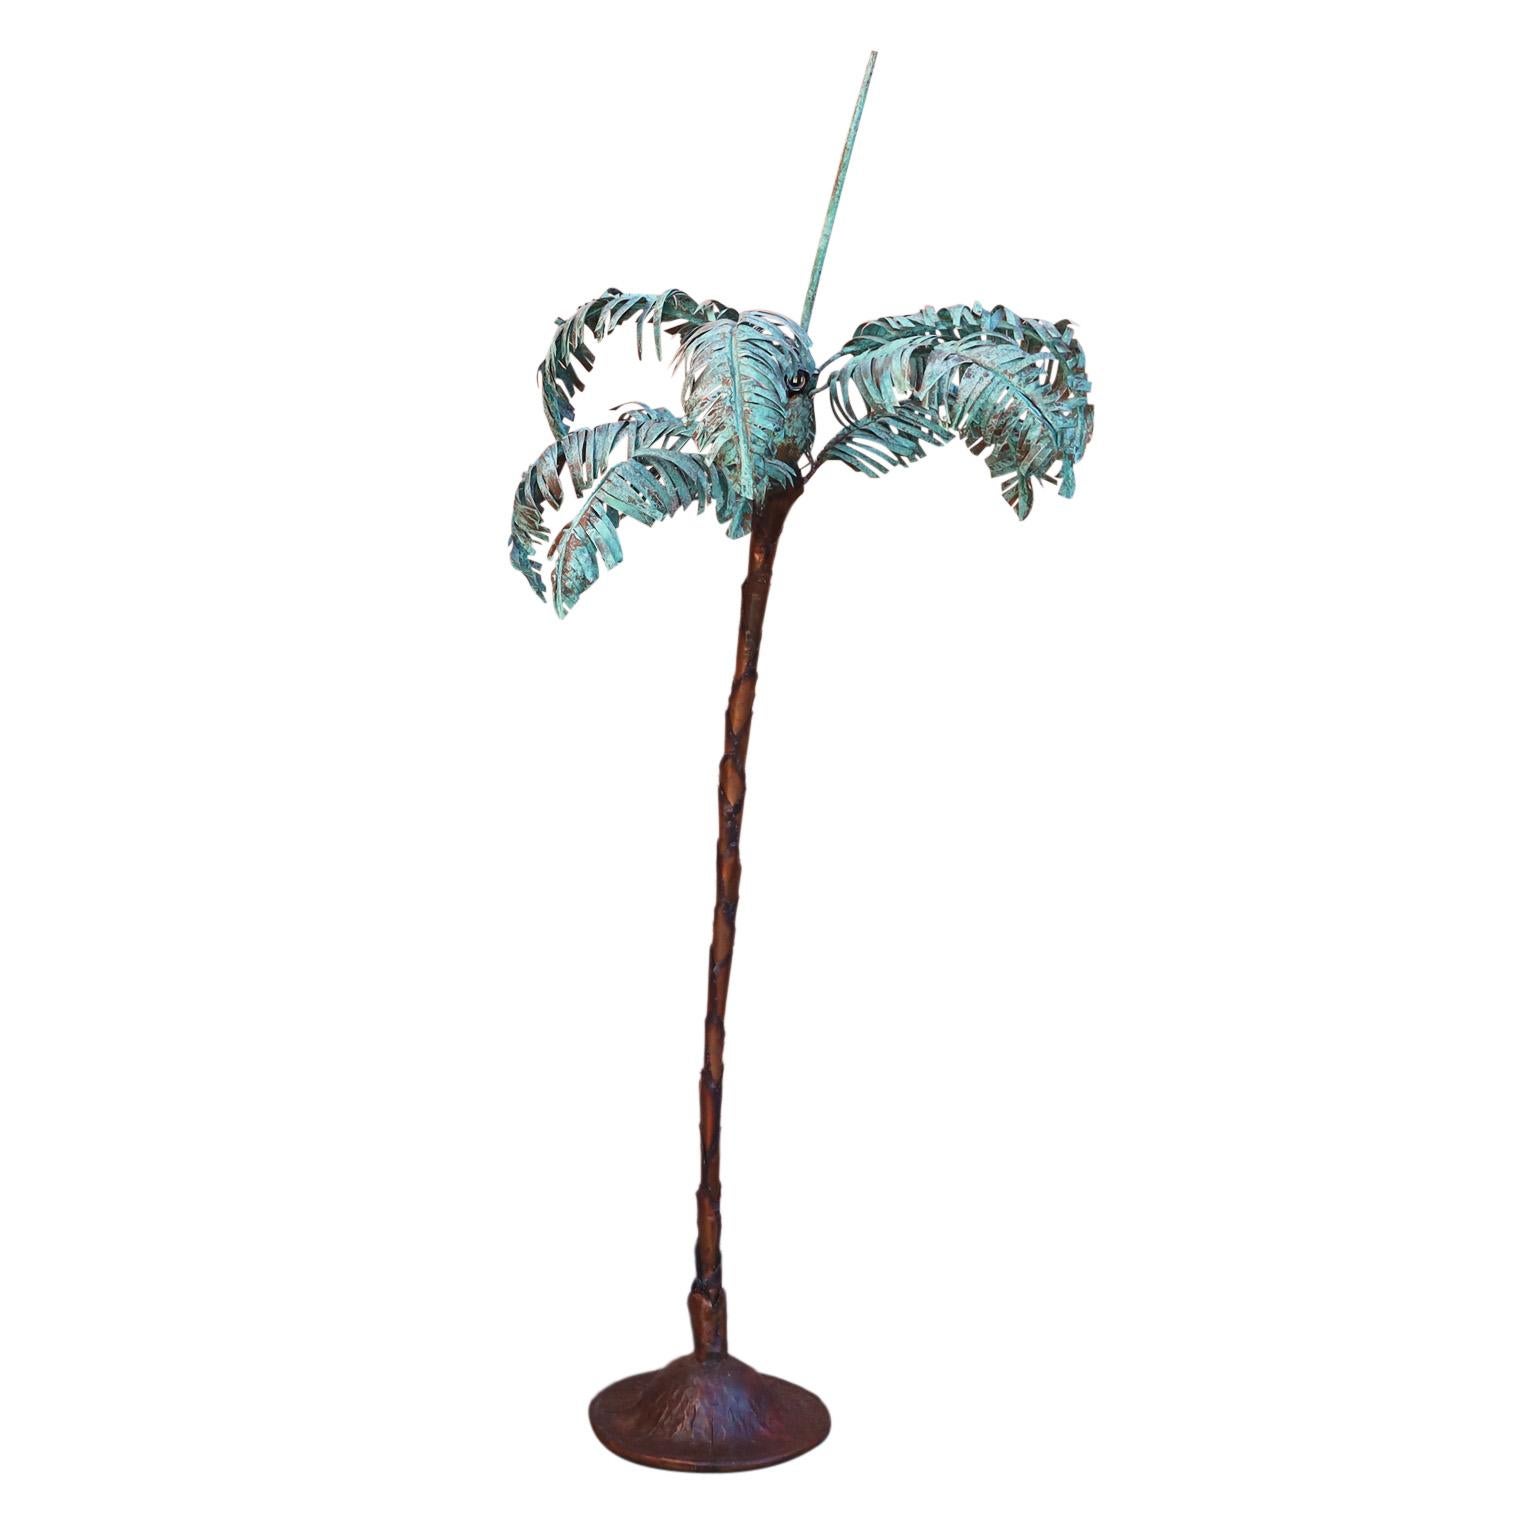 Vintage palm tree floor lamp handcrafted in copper with sculptural and brutalist influences featuring verdigris copper patina palm leaves, four bulb sockets, stylized layered copper trunk and hammered multi patina base.